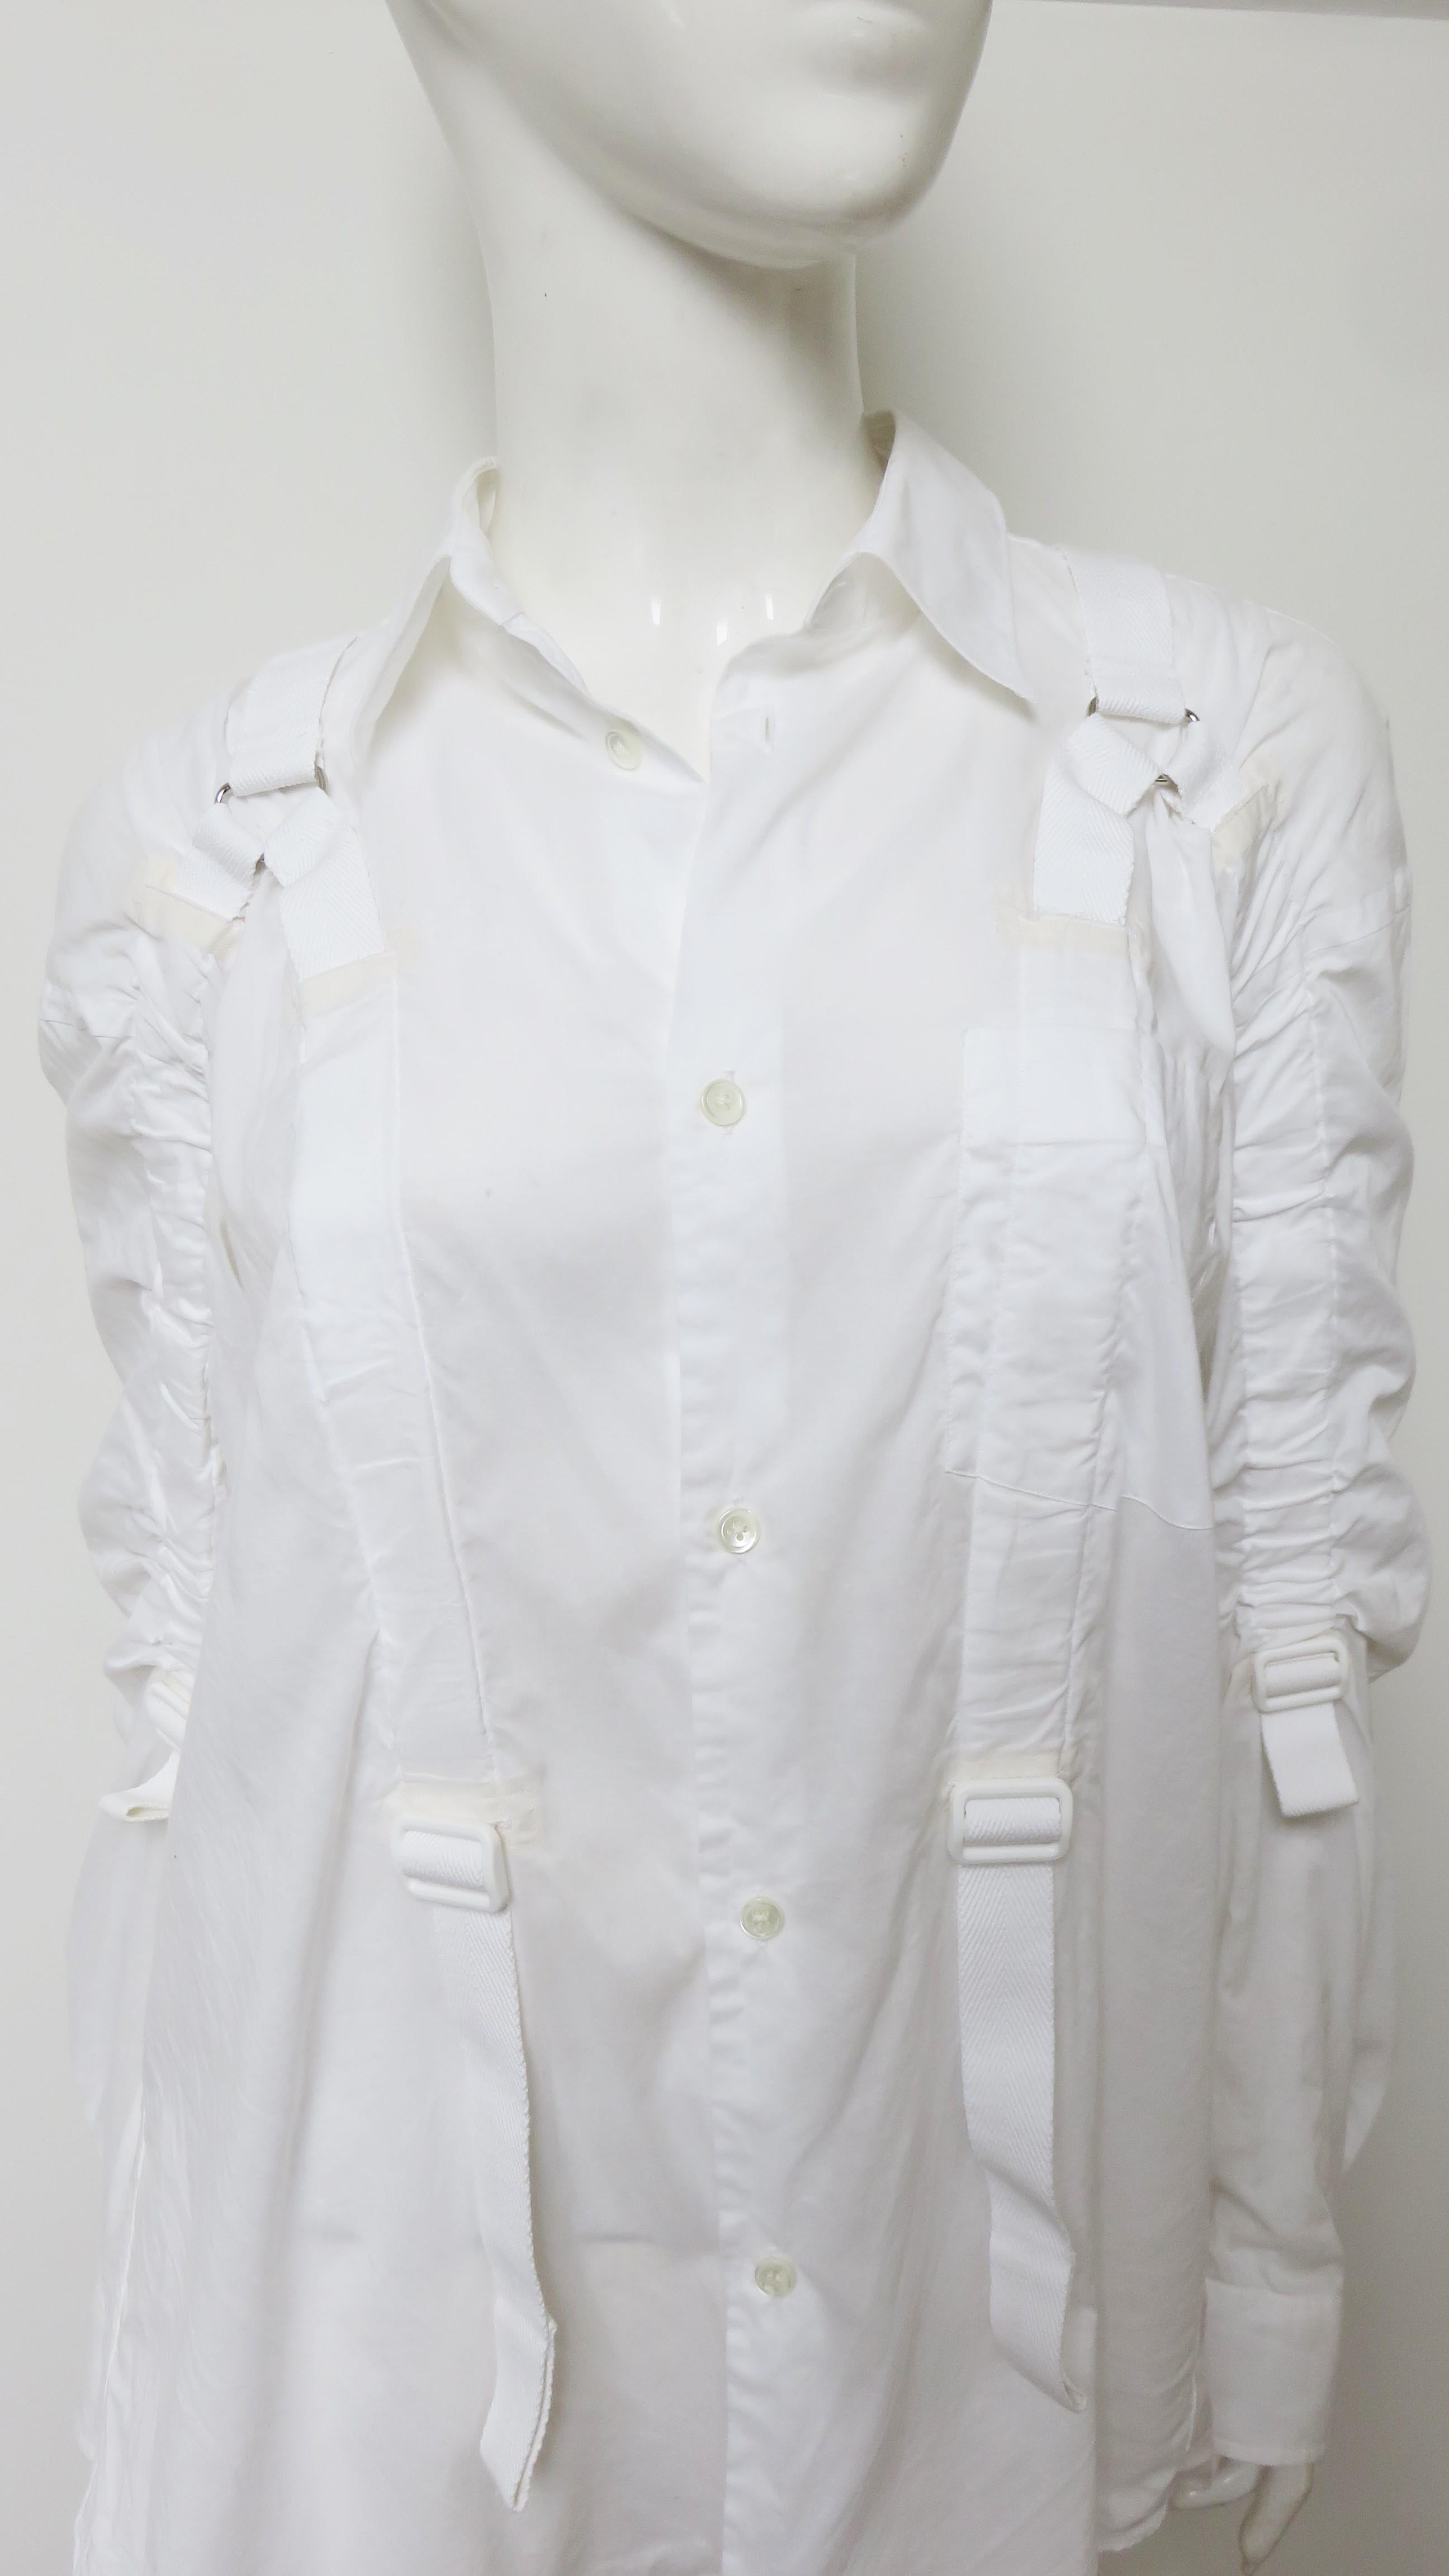 Comme des Garcons AD 2002 Junya Watanabe Shirt In Good Condition For Sale In Water Mill, NY